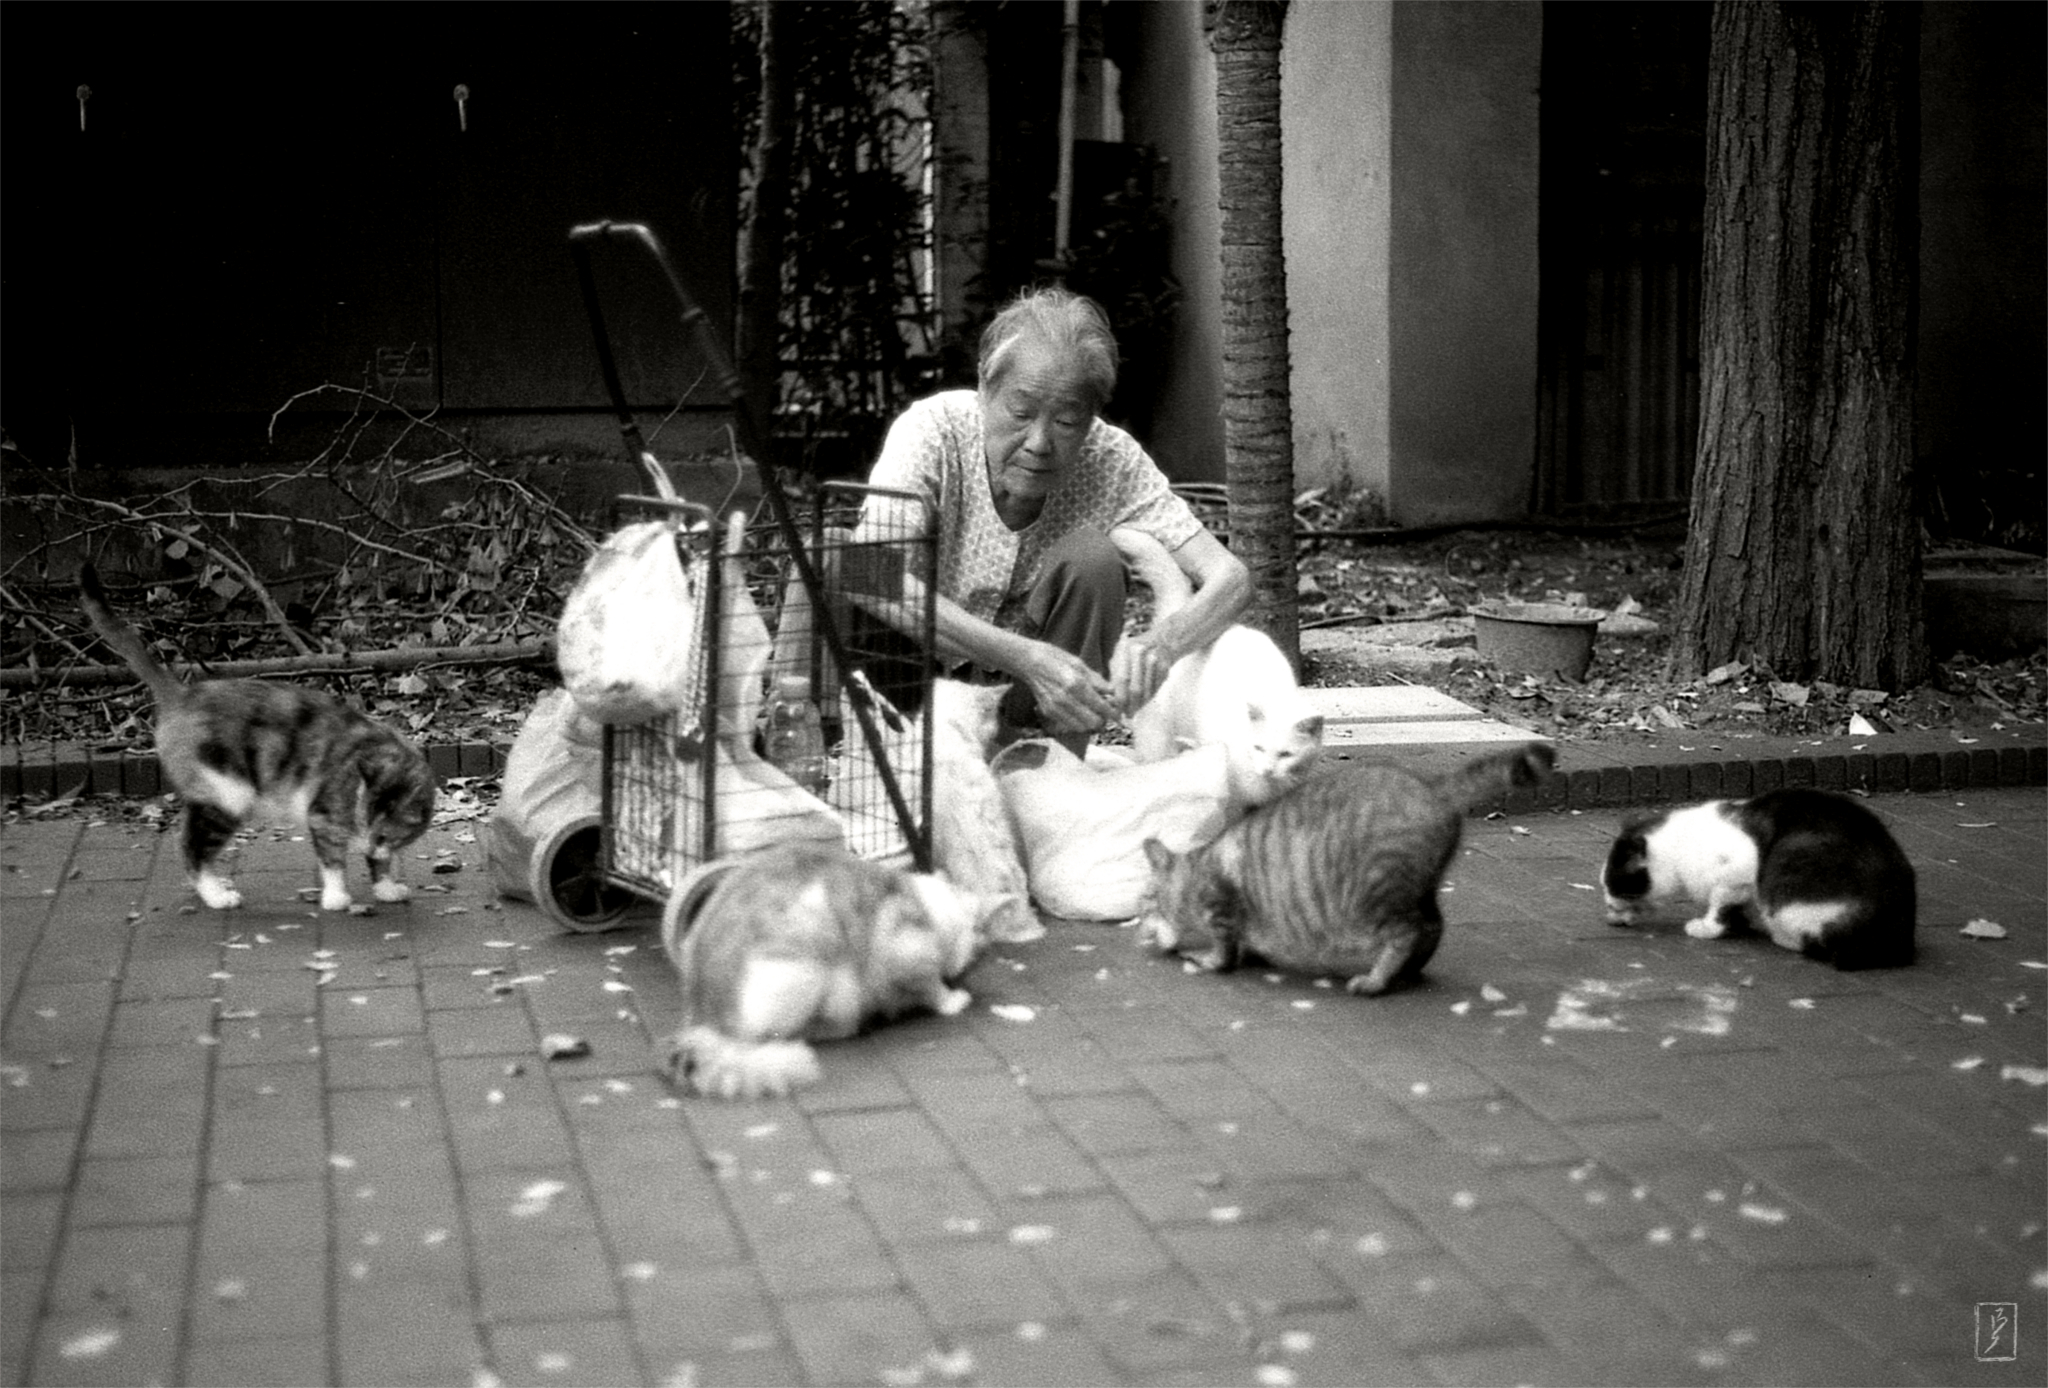 Zhongshan park (中山公园): An old woman with the group of cats she regularly feeds.